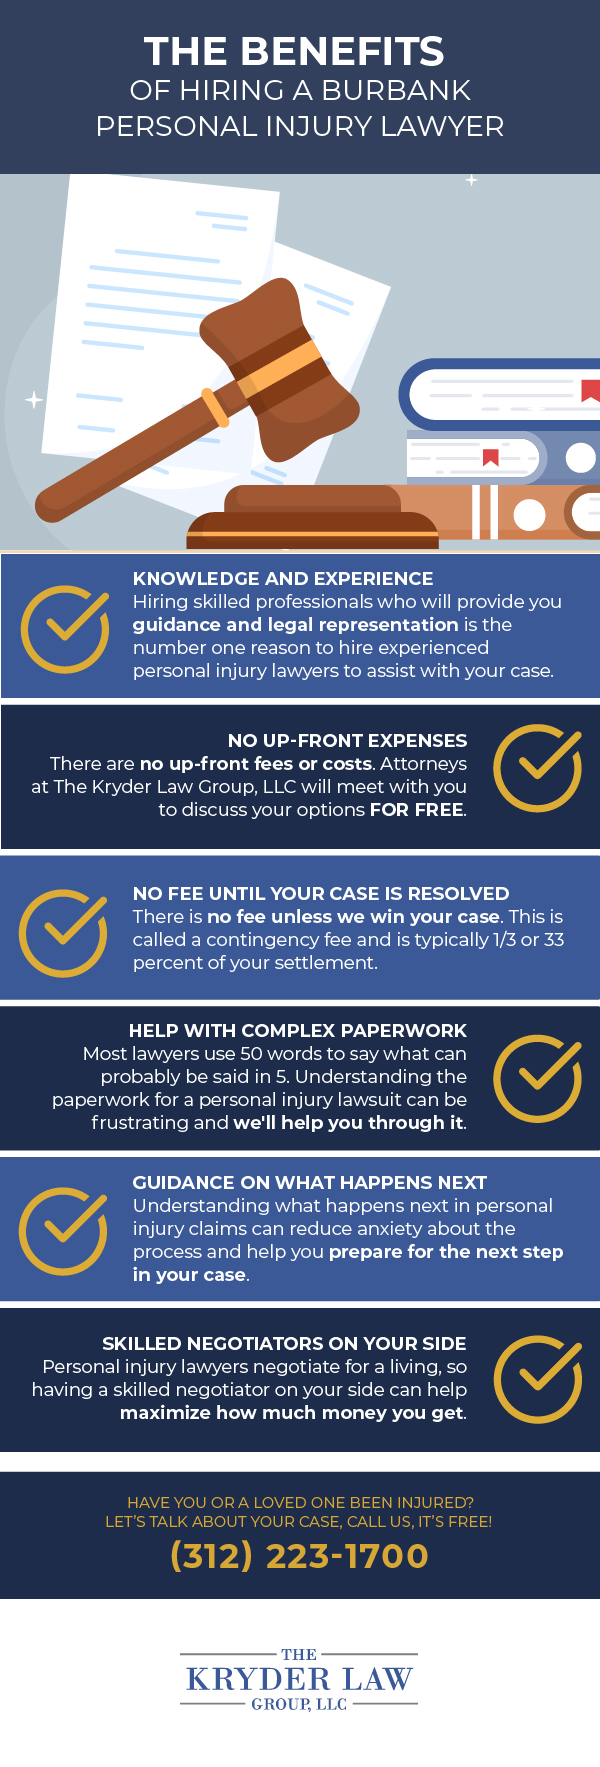 The Benefits of Hiring a Burbank Personal Injury Lawyer Infographic